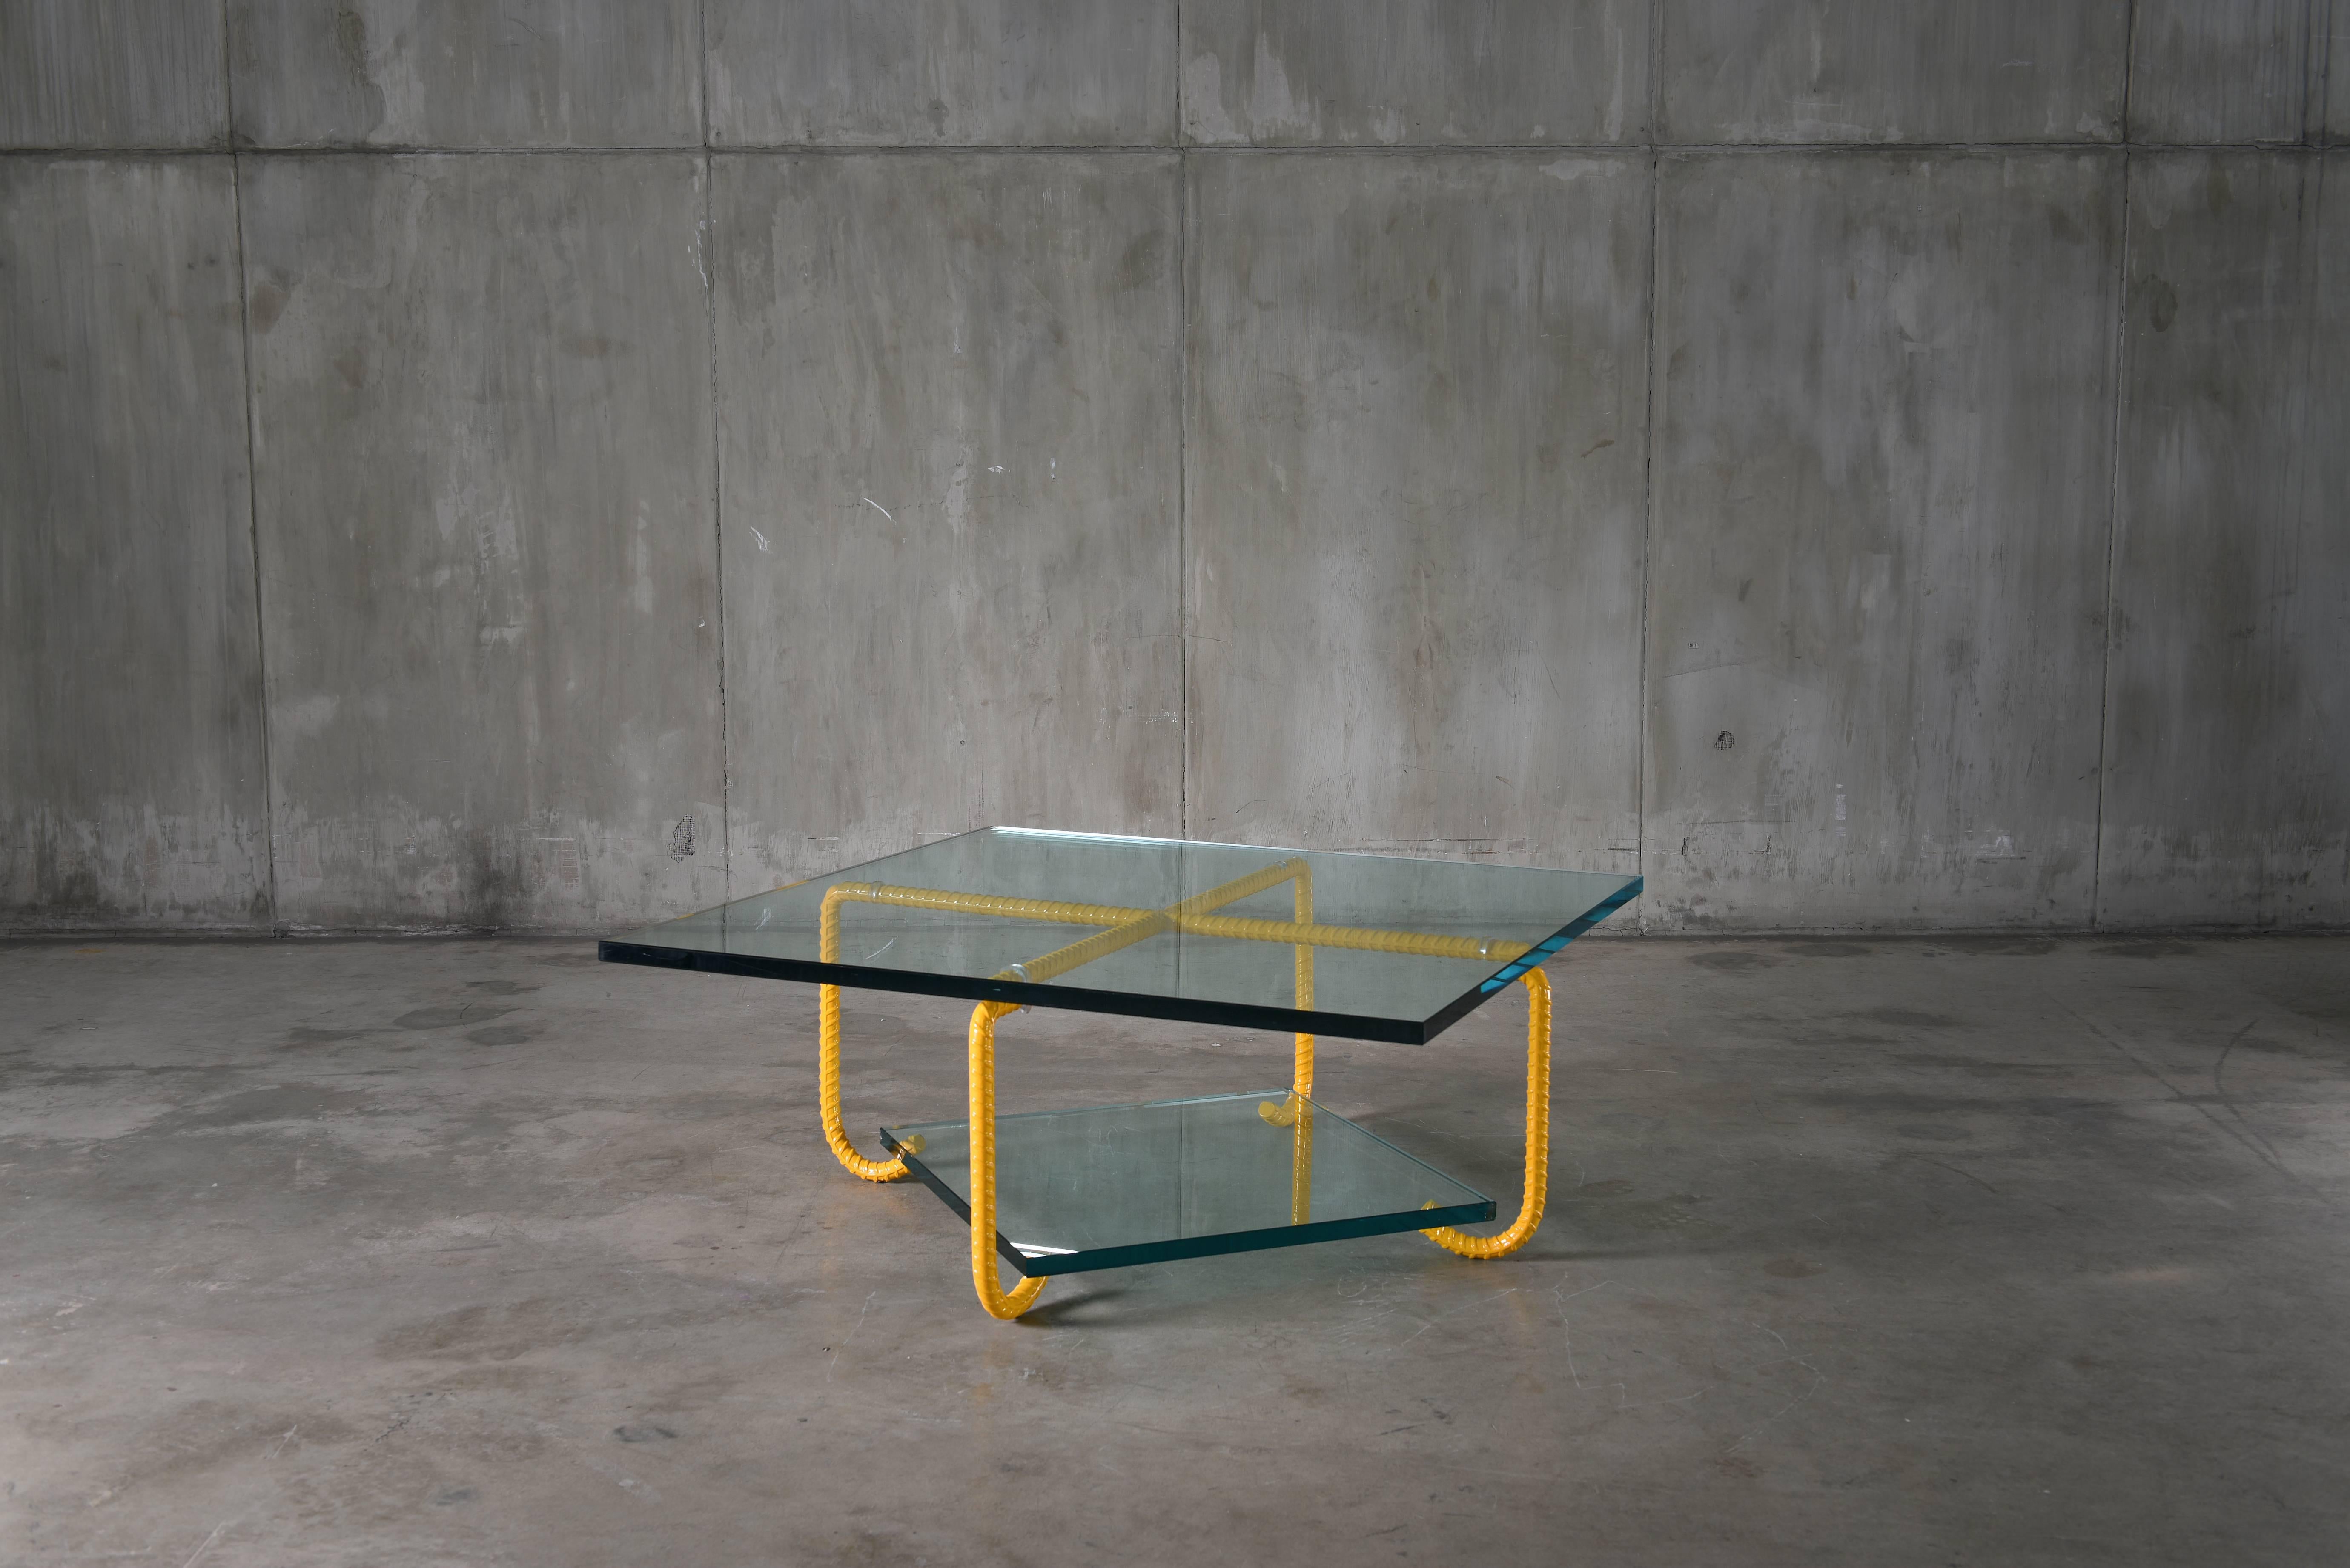 The Ra Coffee Table is part of the Rebar series created by artist Troy Smith. The rebar is the steel used in the forming of concrete to give it strength. Rebar is heated with acetylene torches and red-hot forges, Skillfully sculpted by hand and with